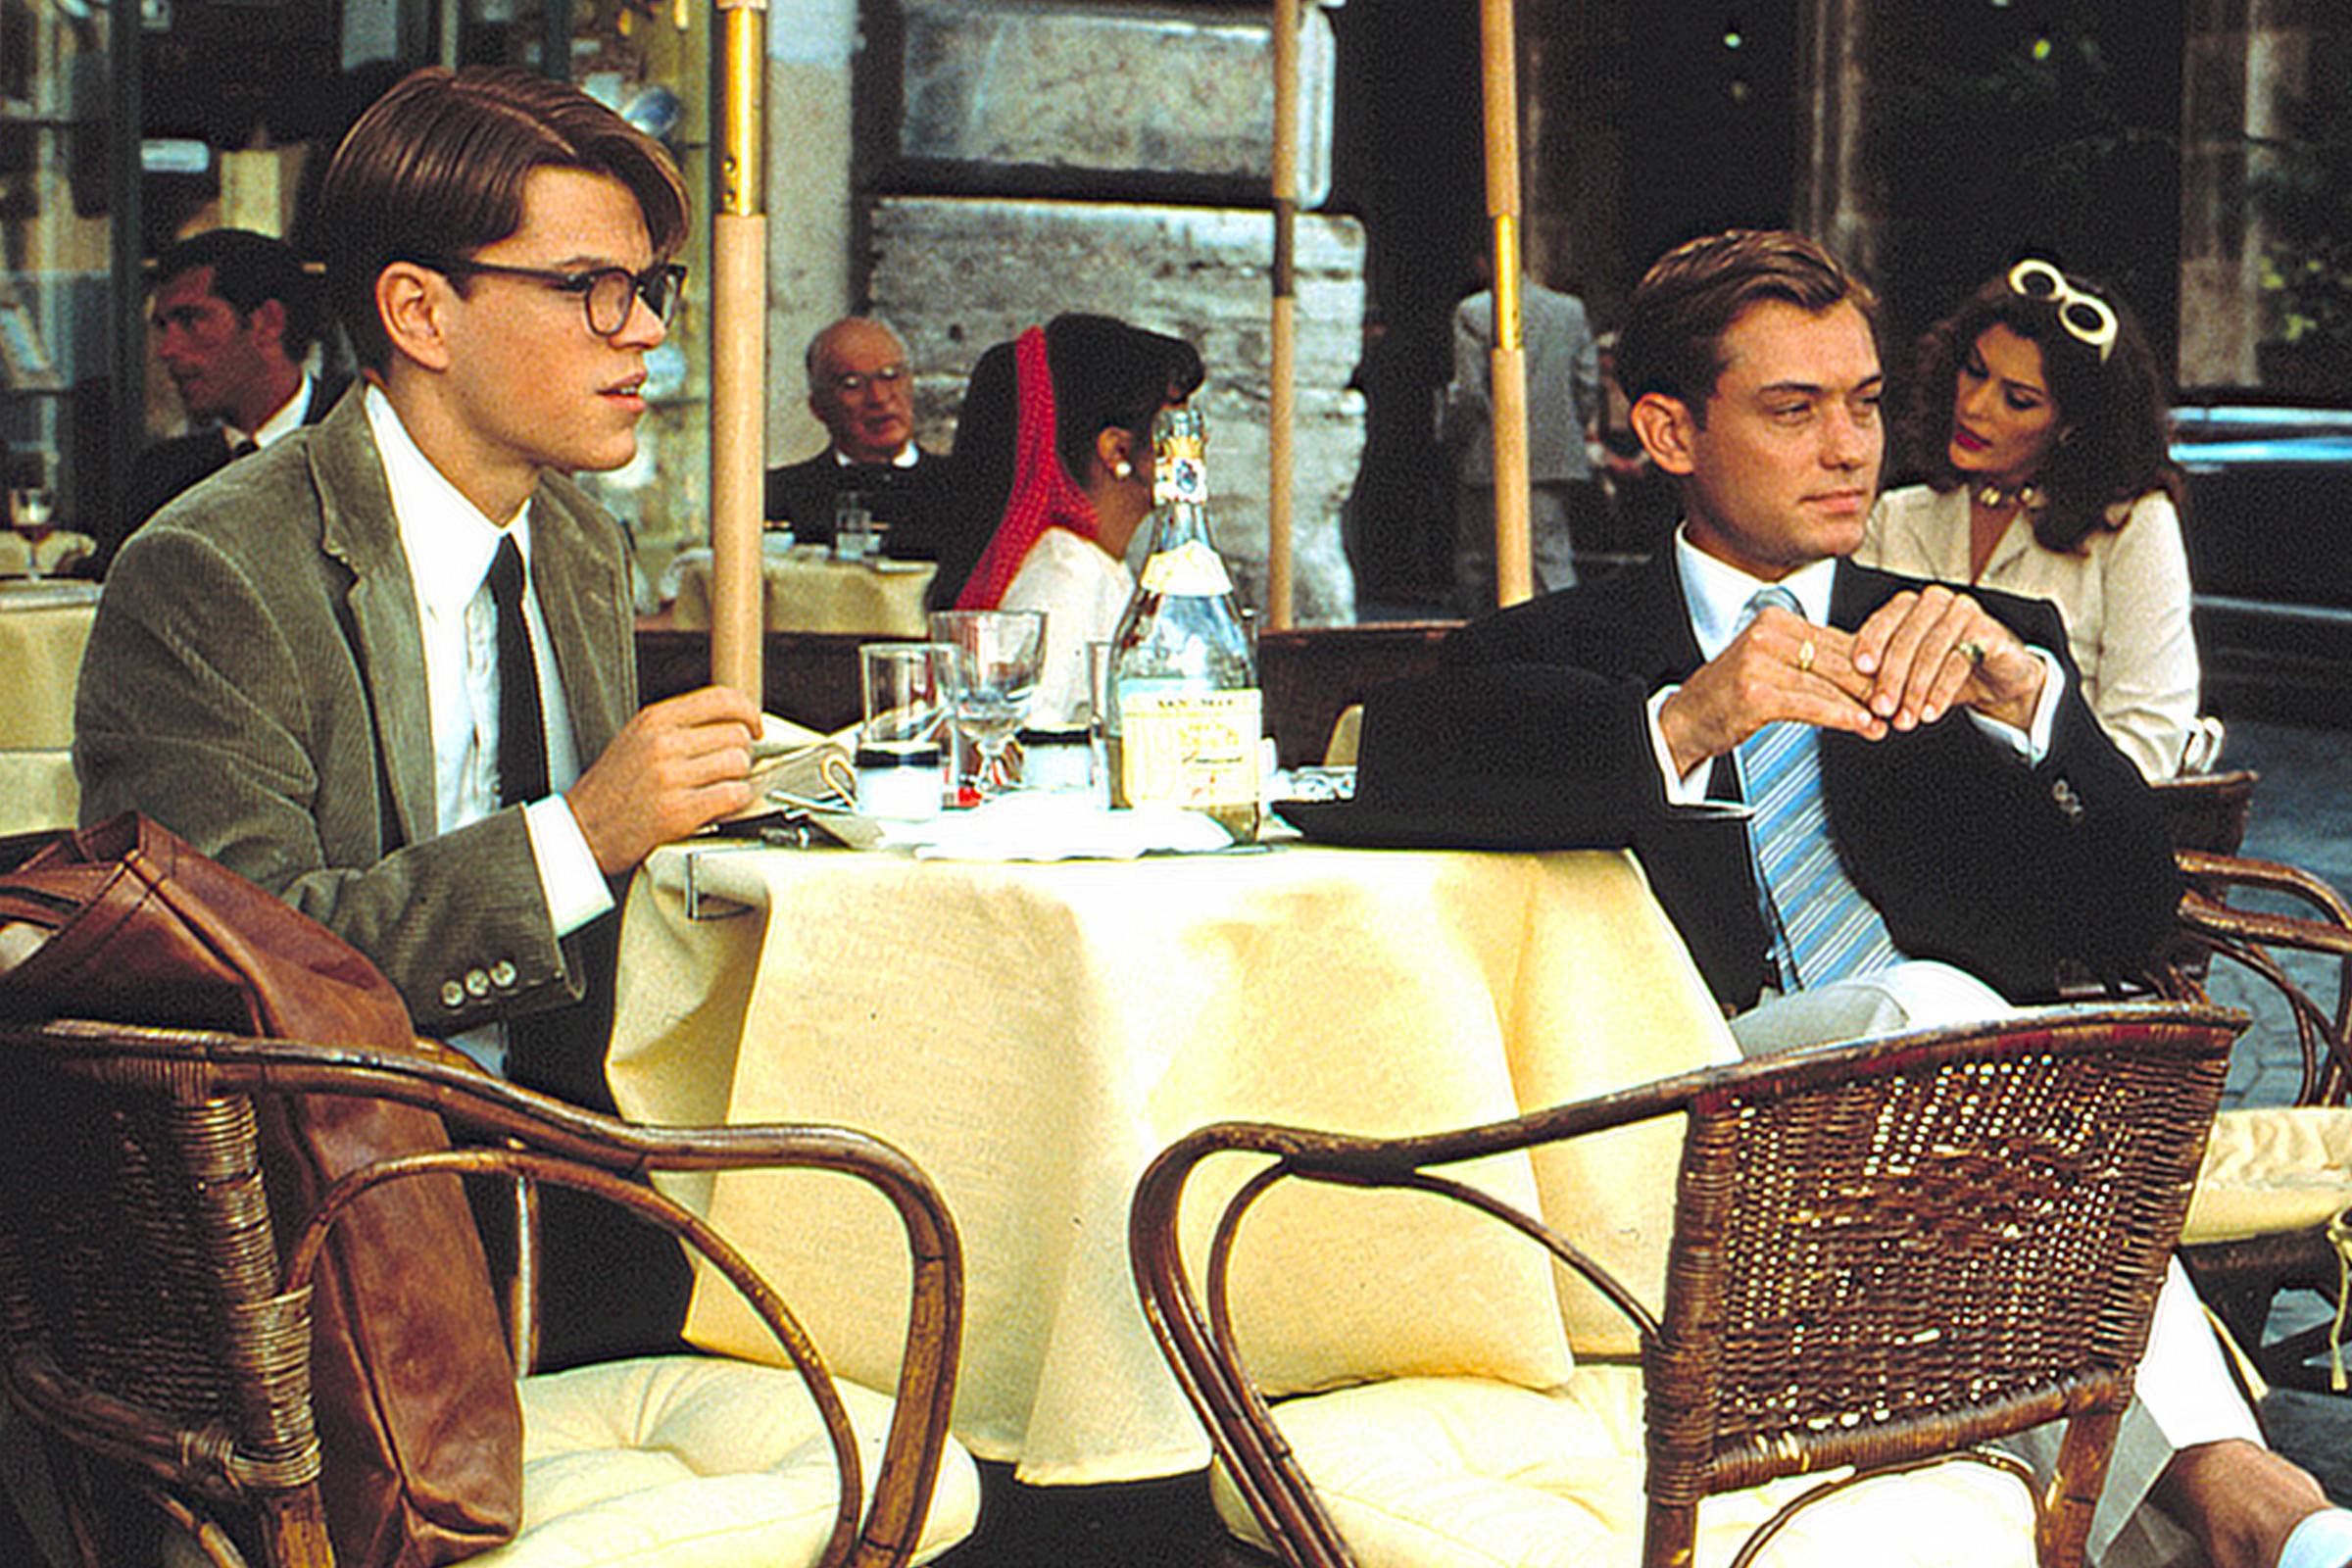 CHIC CINEMA: THE TALENTED MR. RIPLEY INSPIRES FOR SPRING - Society Texas